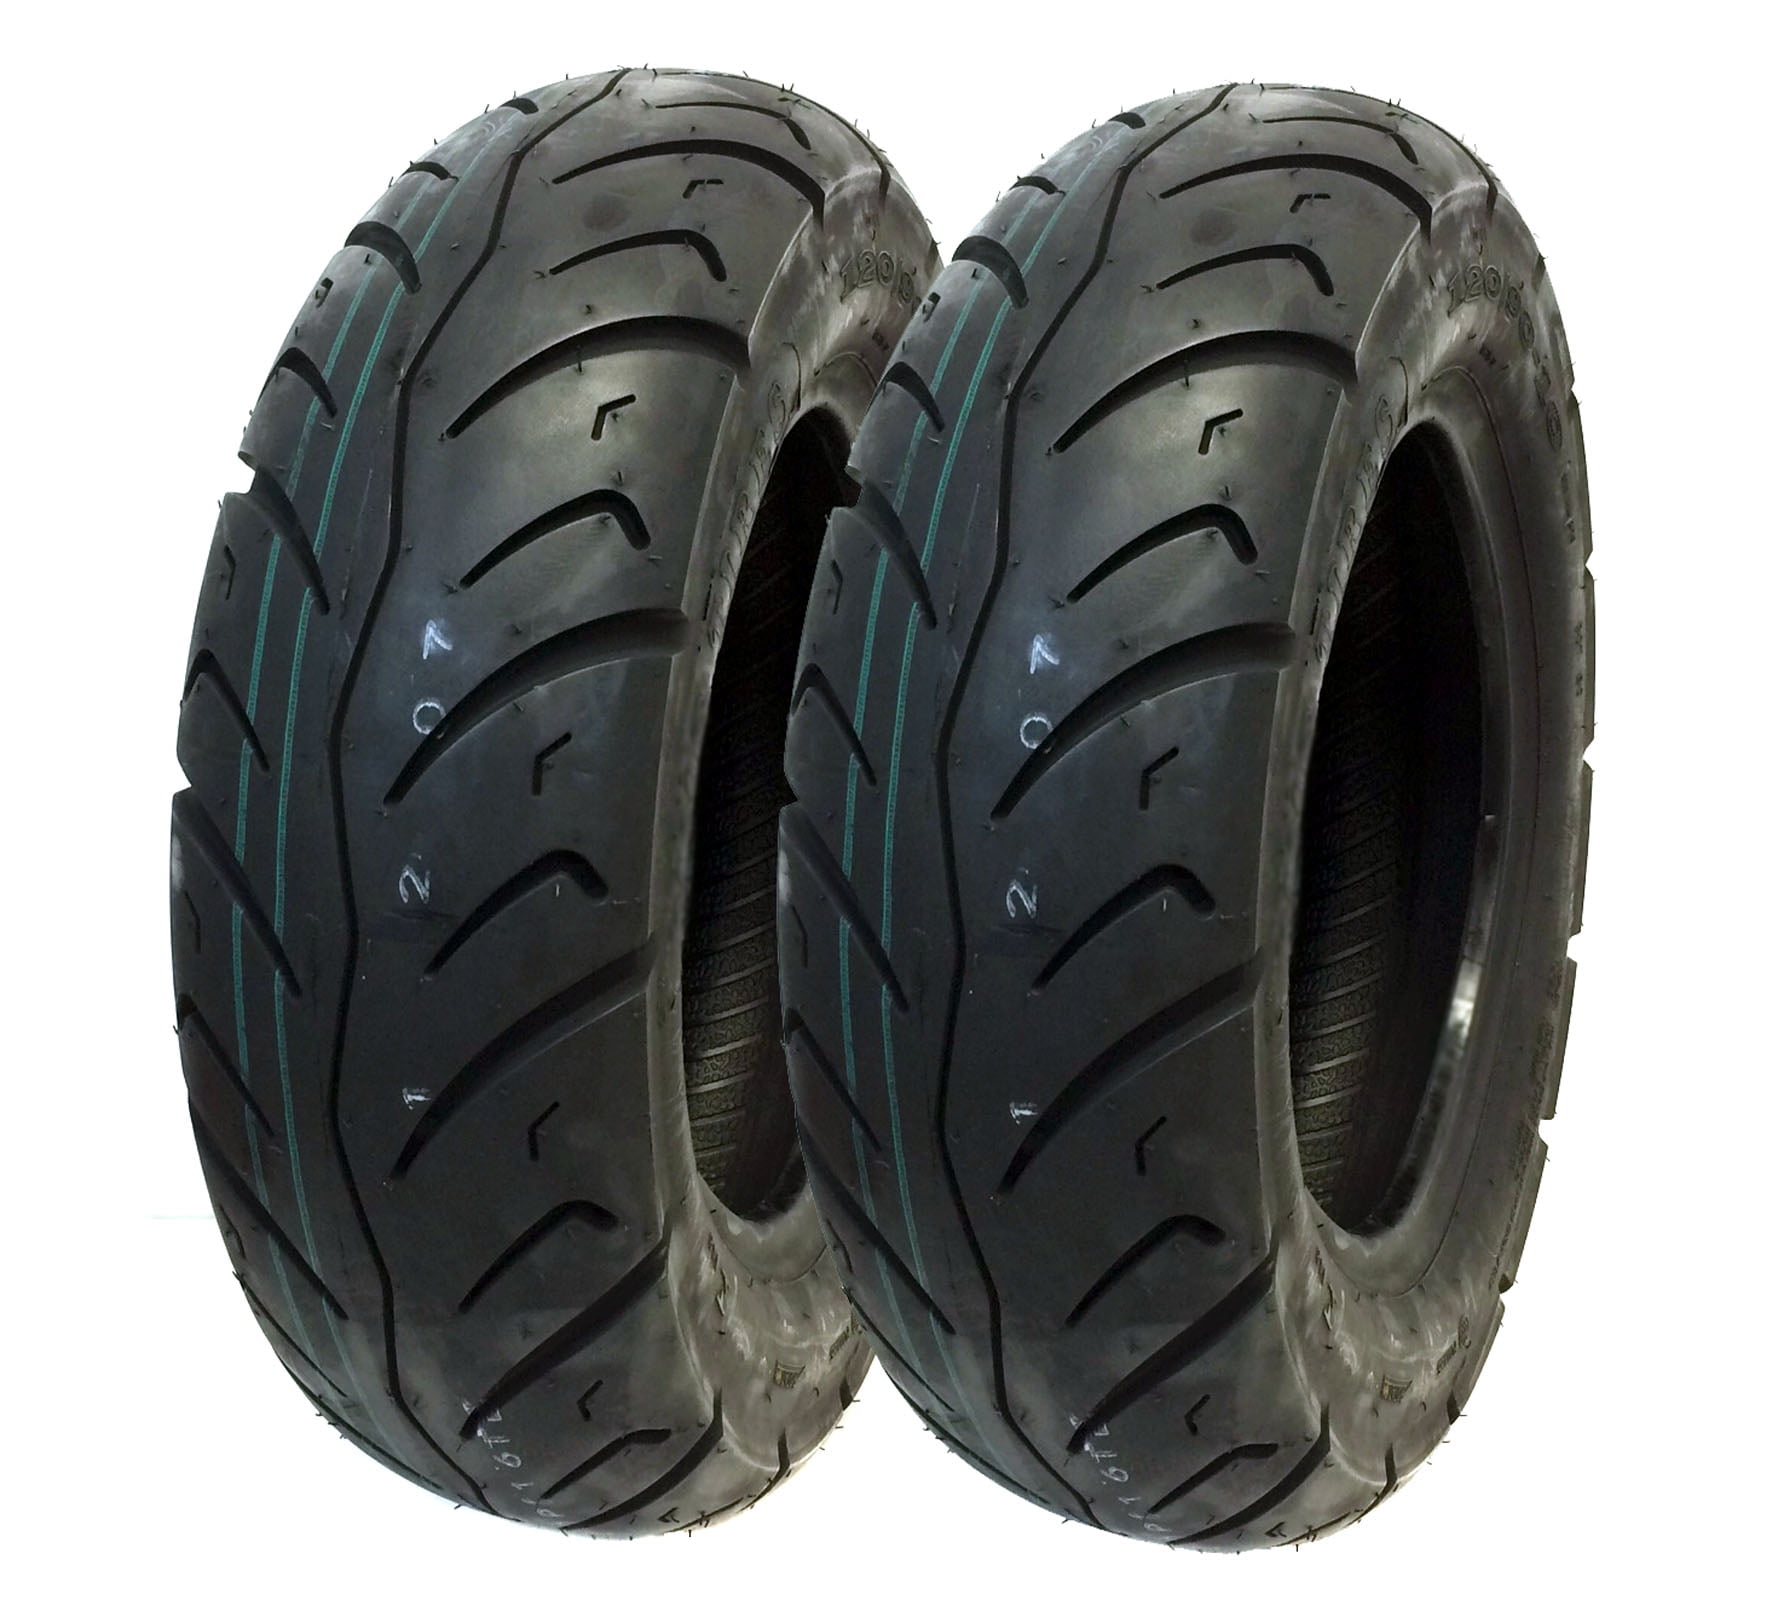 KENDA K413 110-80-12 12" TIRE 110/80-12 MOTORCYCLE MOPED SCOOTER STREET I TR84 